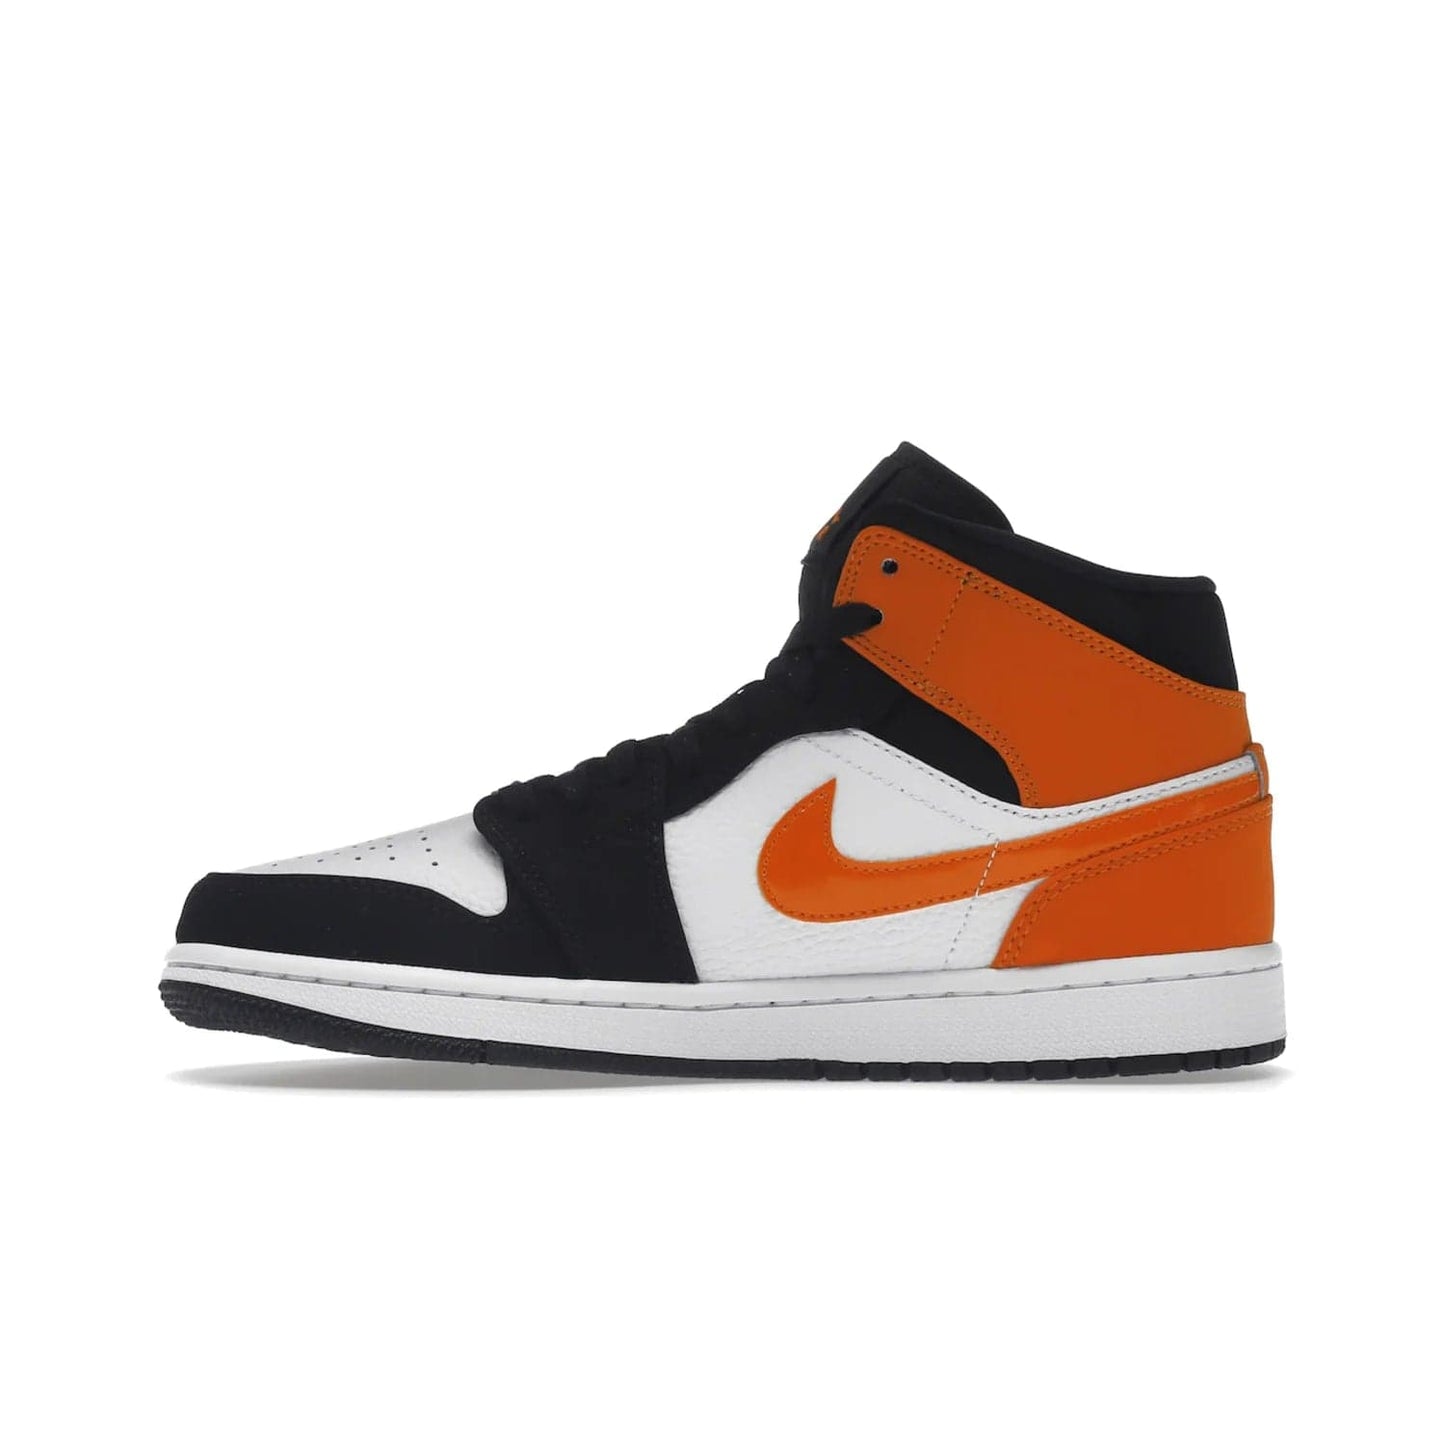 Jordan 1 Mid Shattered Backboard - Image 19 - Only at www.BallersClubKickz.com - The Air Jordan 1 Mid Shattered Backboard offers a timeless Black/White-Starfish colorway. Classic Swoosh logo and AJ insignia plus a shatterd backboard graphic on the insole. Get your pair today!